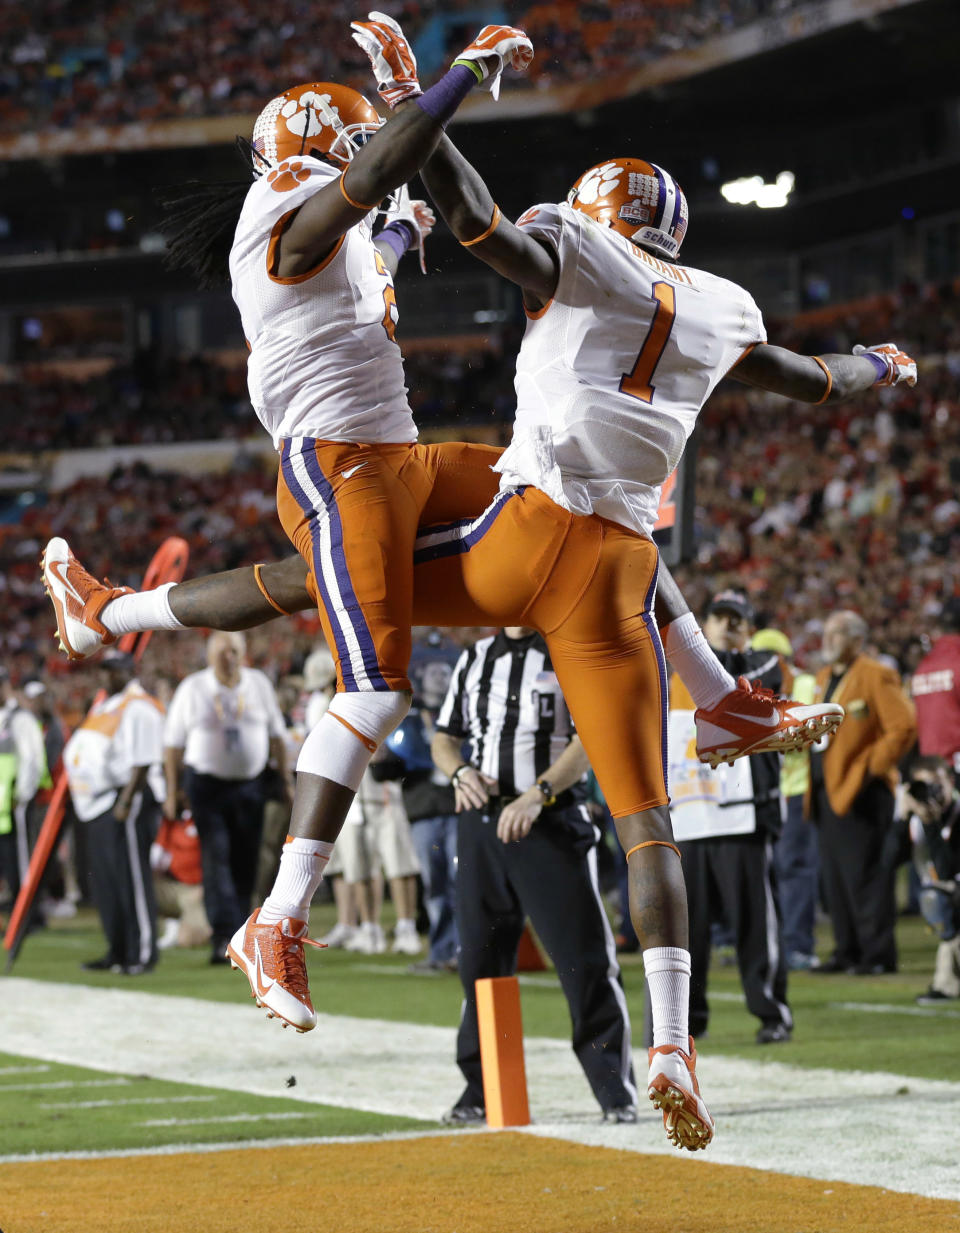 Clemson wide receiver Martavis Bryant (1) celebrates with wide receiver Sammy Watkins, left, after scoring a touchdown during the first half of the Orange Bowl NCAA college football game against Ohio State, Friday, Jan. 3, 2014, in Miami Gardens, Fla. (AP Photo/Wilfredo Lee)